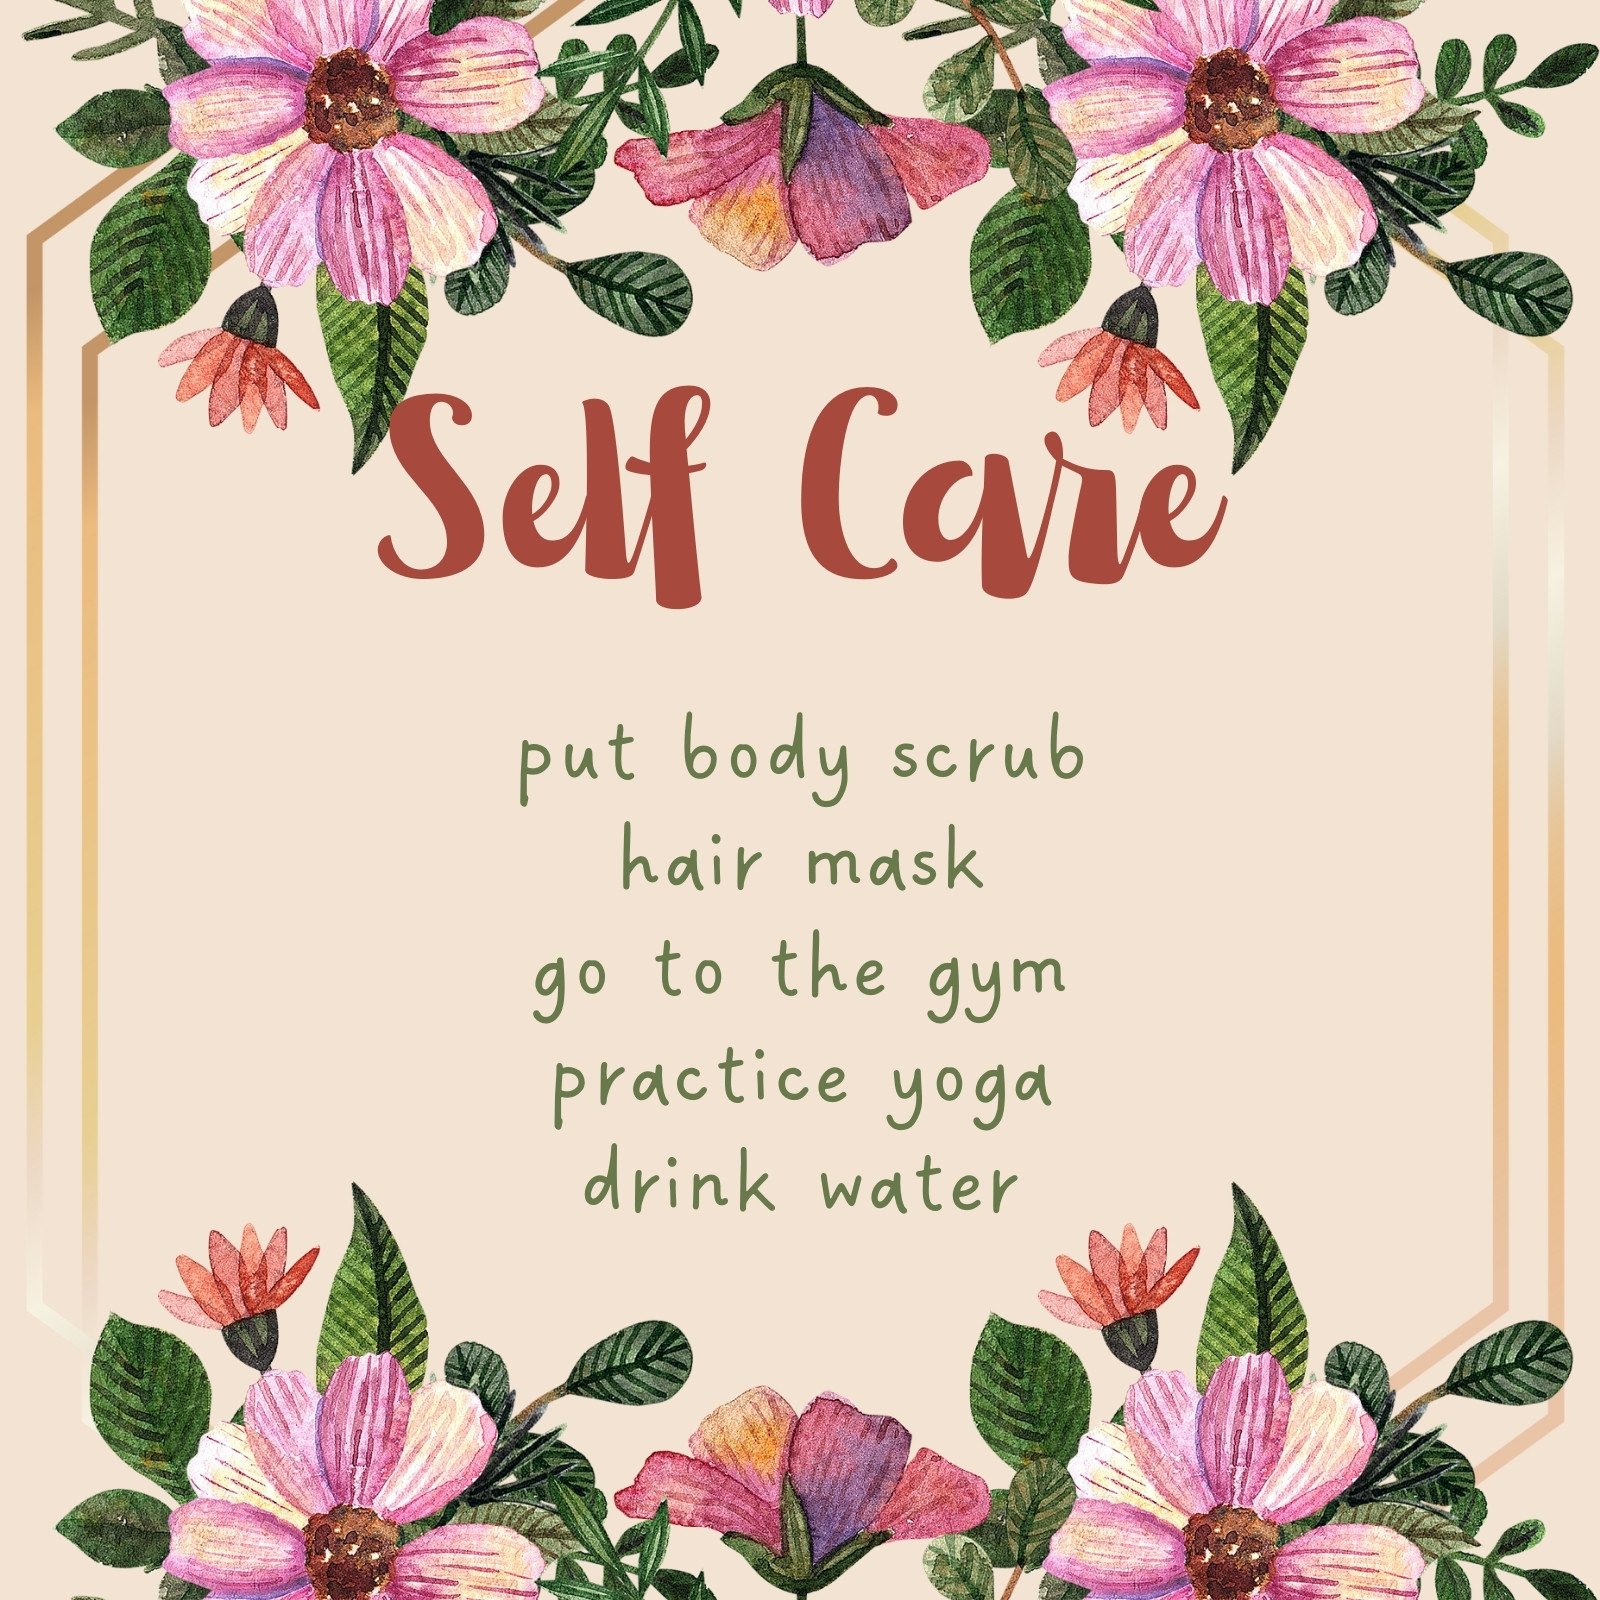 3 Aesthetic iPhone Wallpaper Self-care Love Quote Pink Cream 